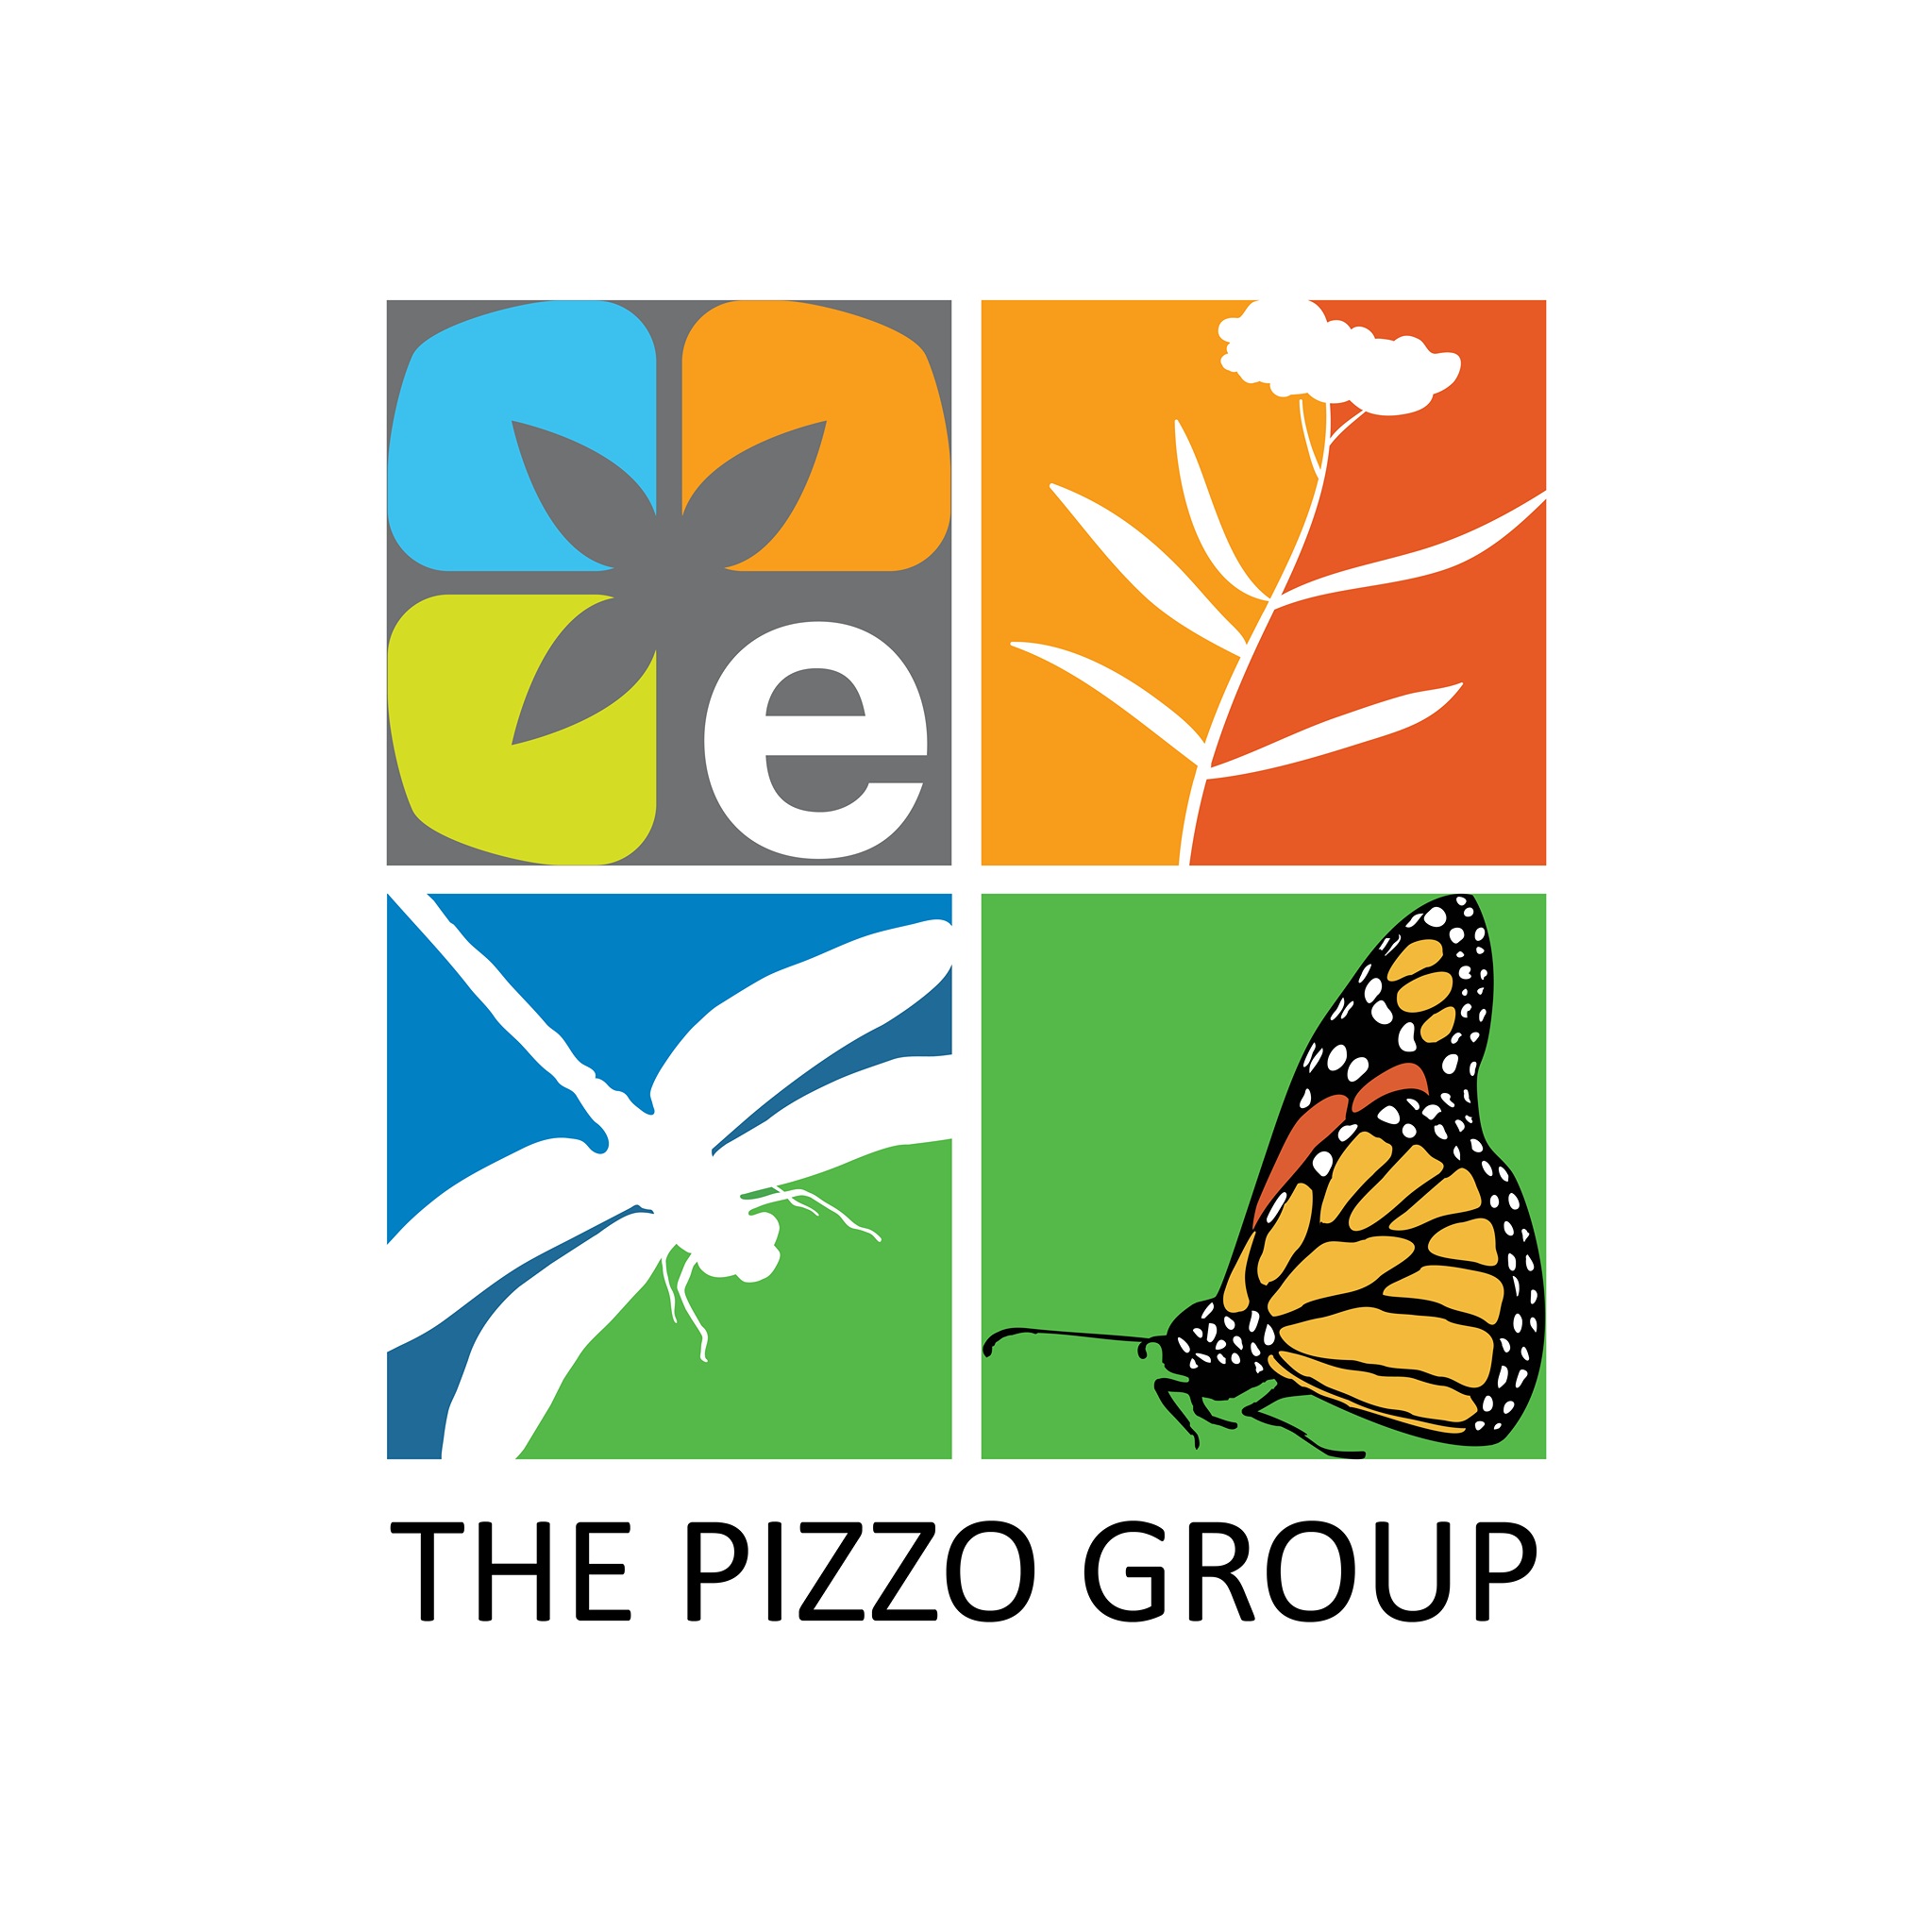 The Pizzo Group